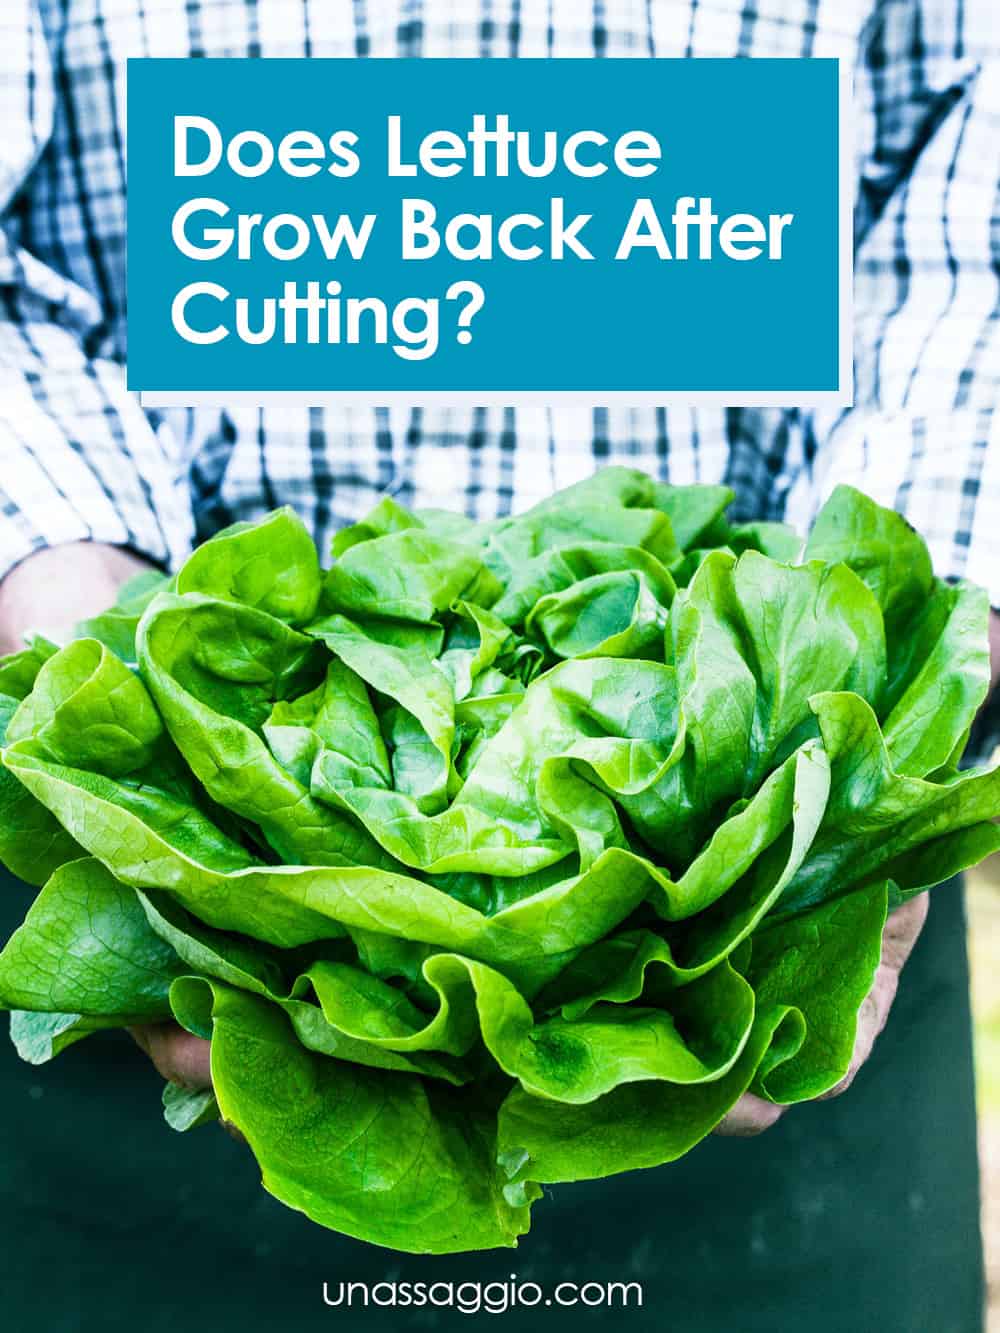 Does lettuce grow back after you cut it?